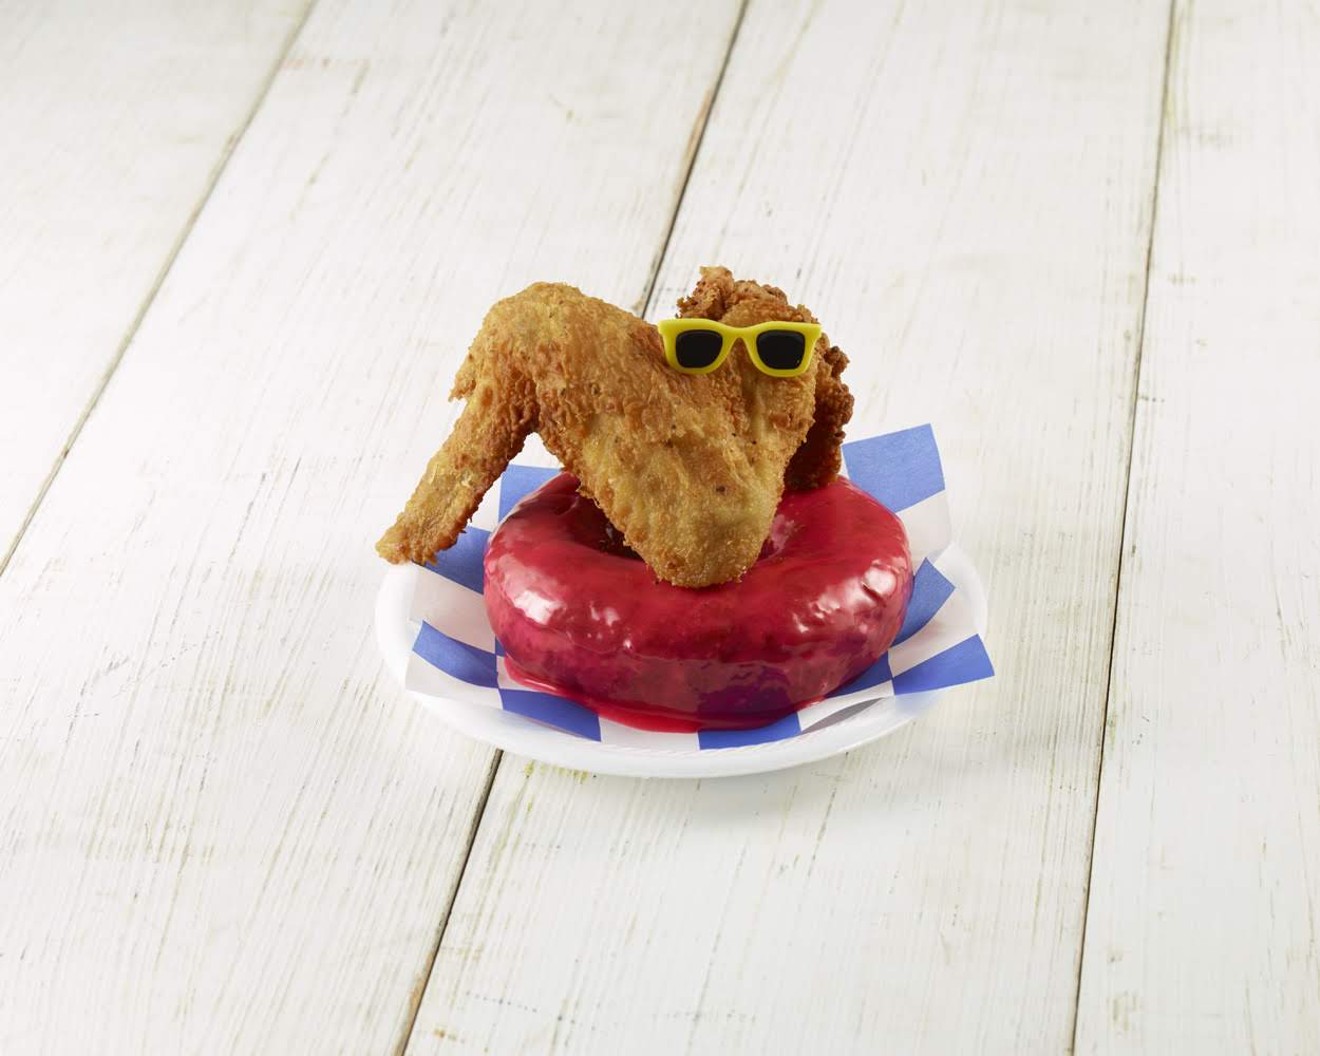 Big Red Chicken Bread: complete with a sunglasses-wearing chicken wing